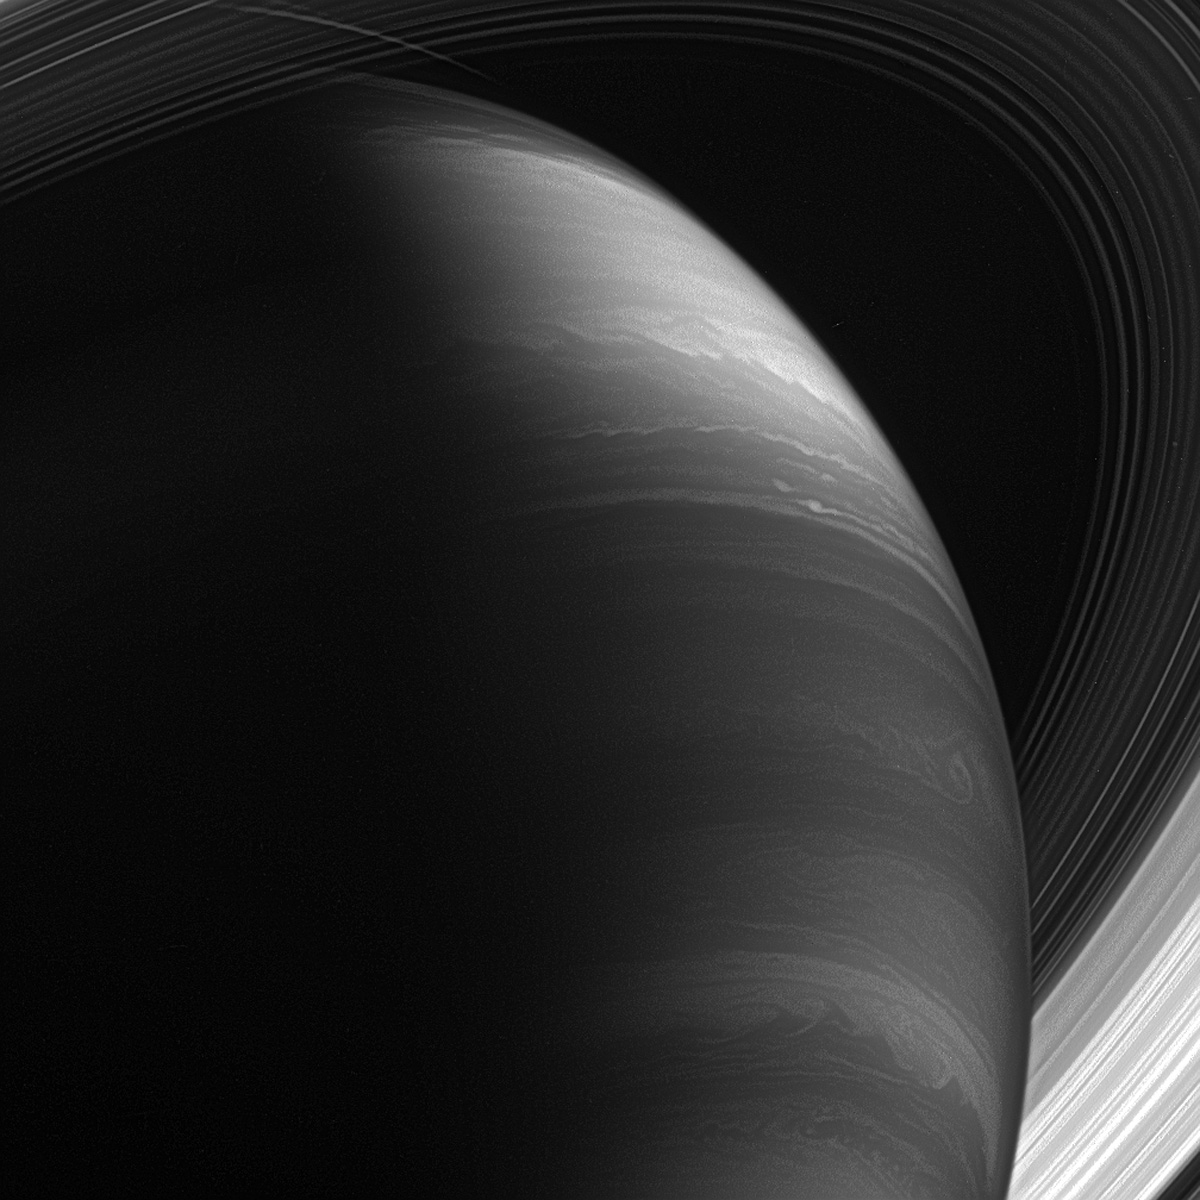 The 50 Most Amazing Images From A Decade Of Orbiting Saturn